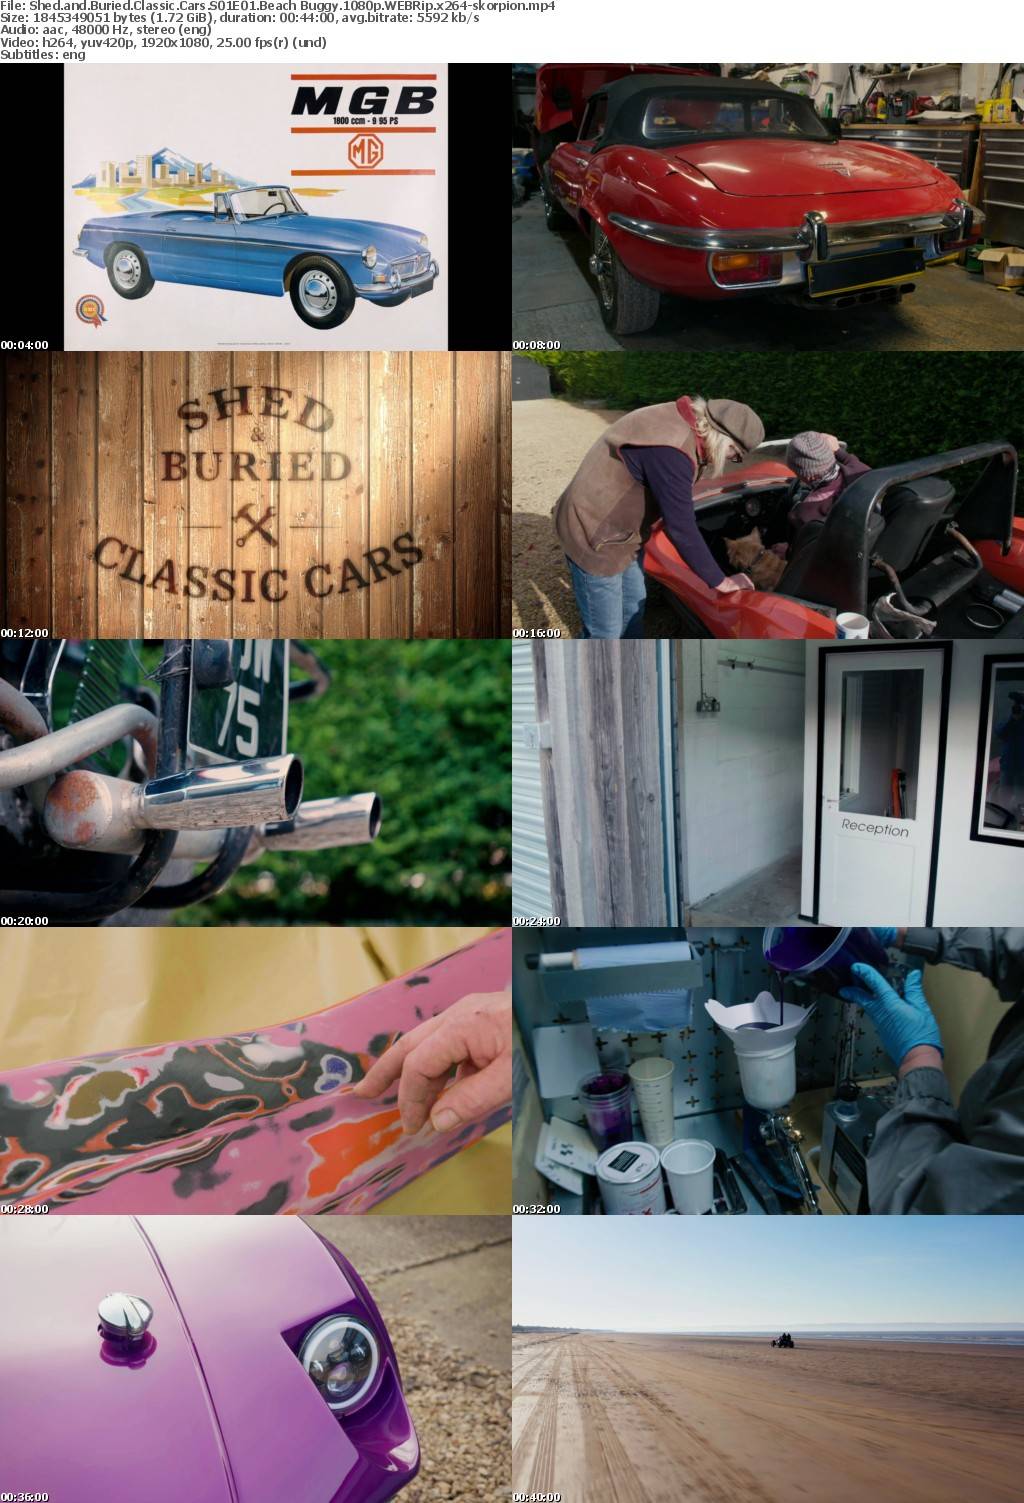 Shed and Buried Classic Cars S01E01 Beach Buggy 1080p WEBRip x264-skorpion mp4